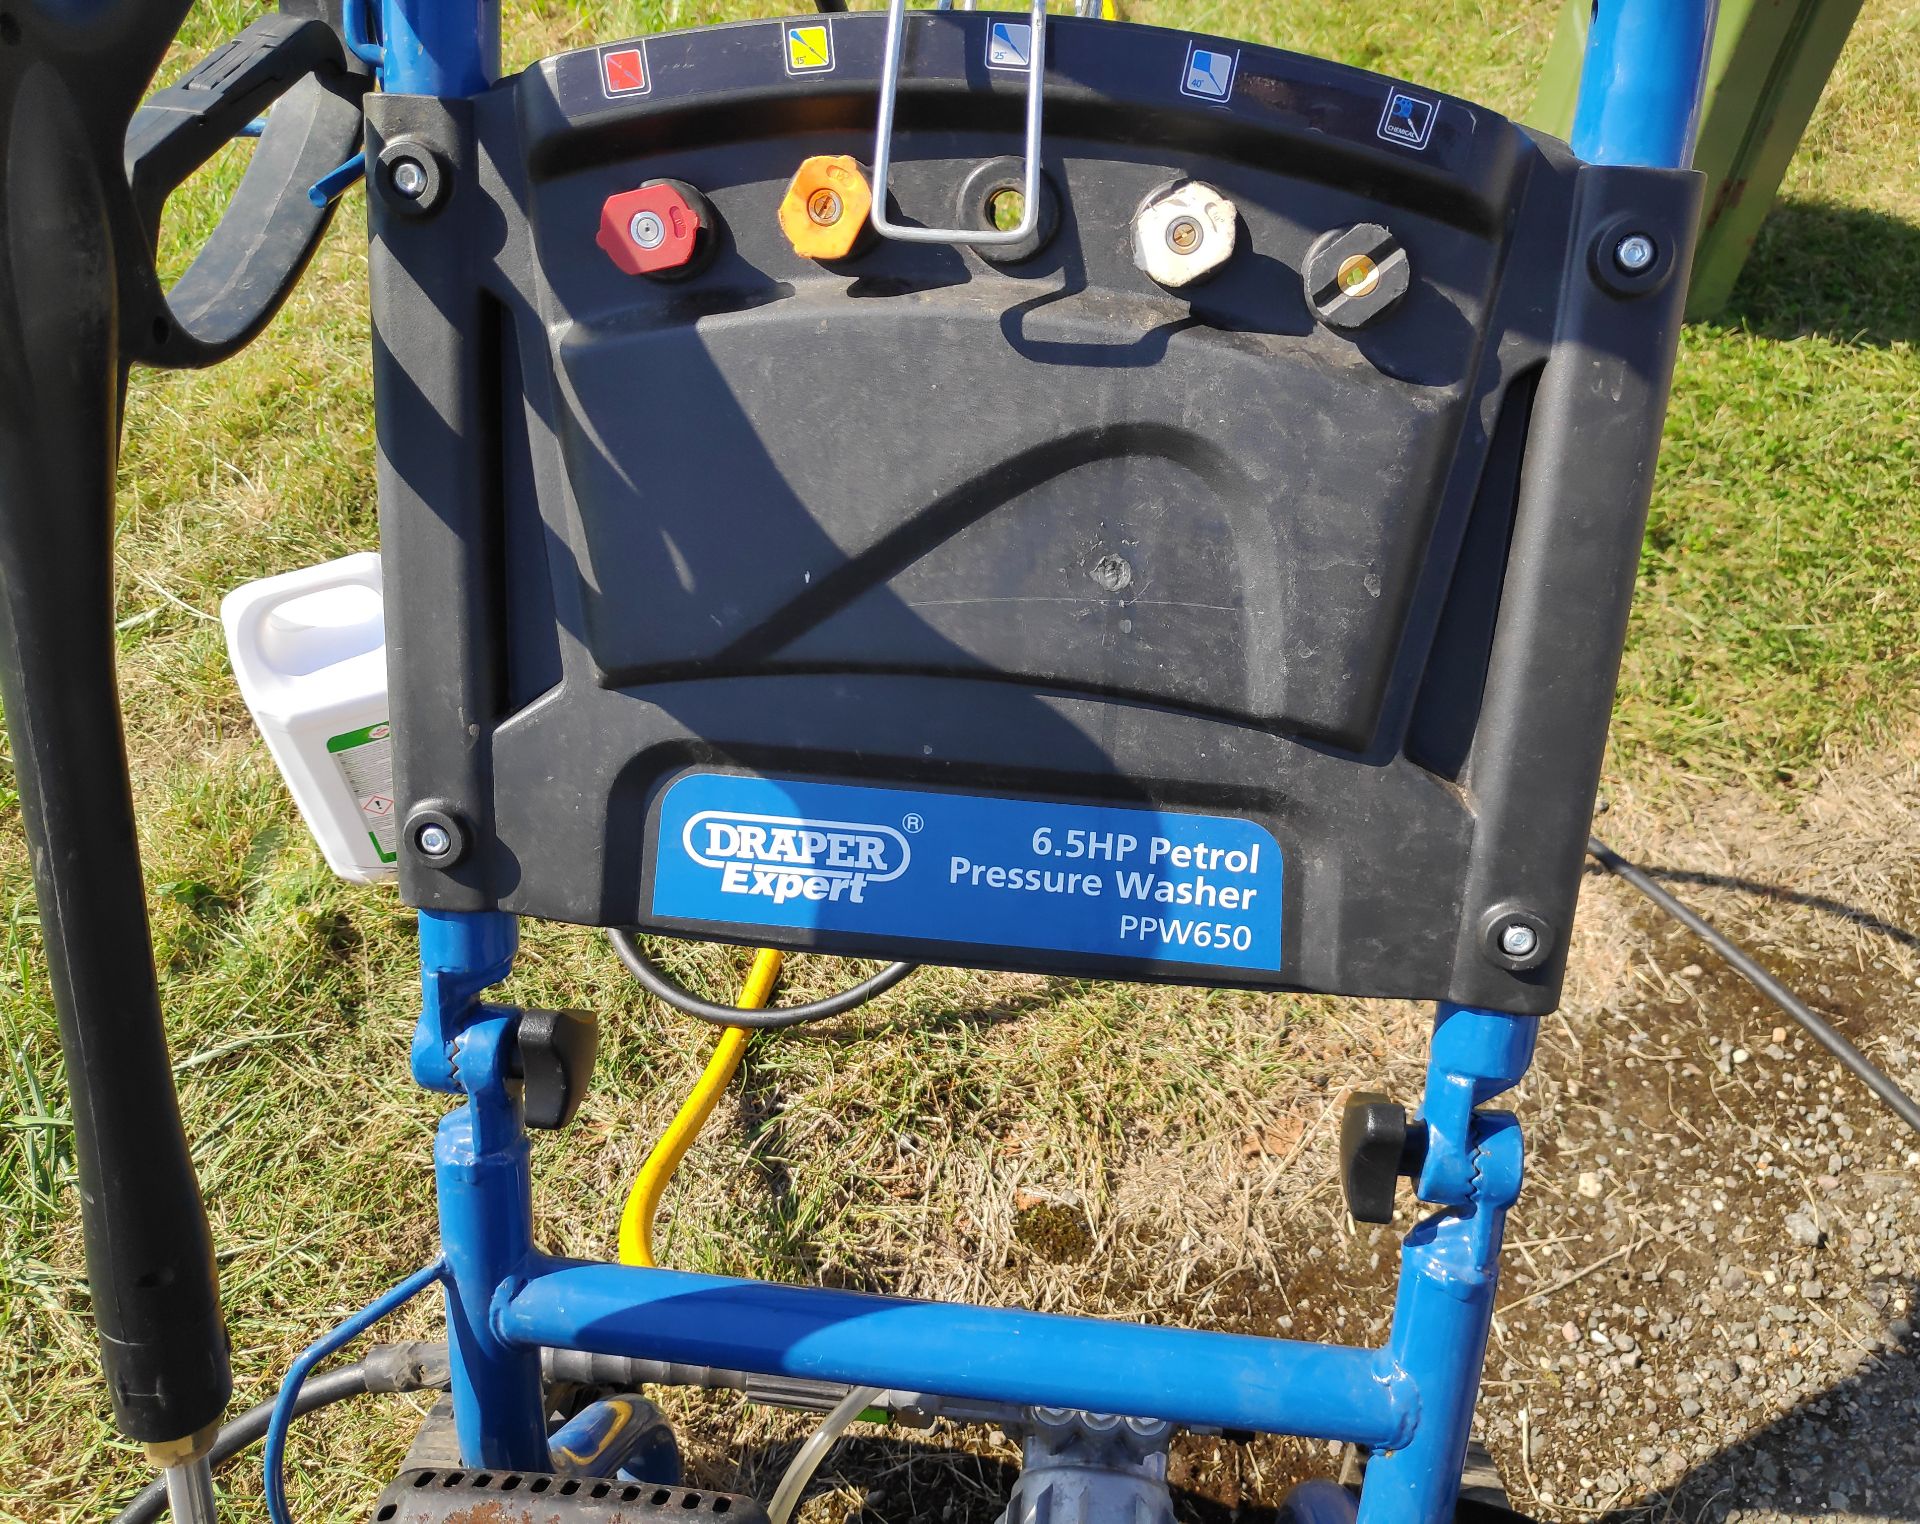 1 x Draper Expert 6.5Hp Petrol Pressure Washer PPW650 - CL011 - Location: Corby, Northamptonshire - Image 4 of 10